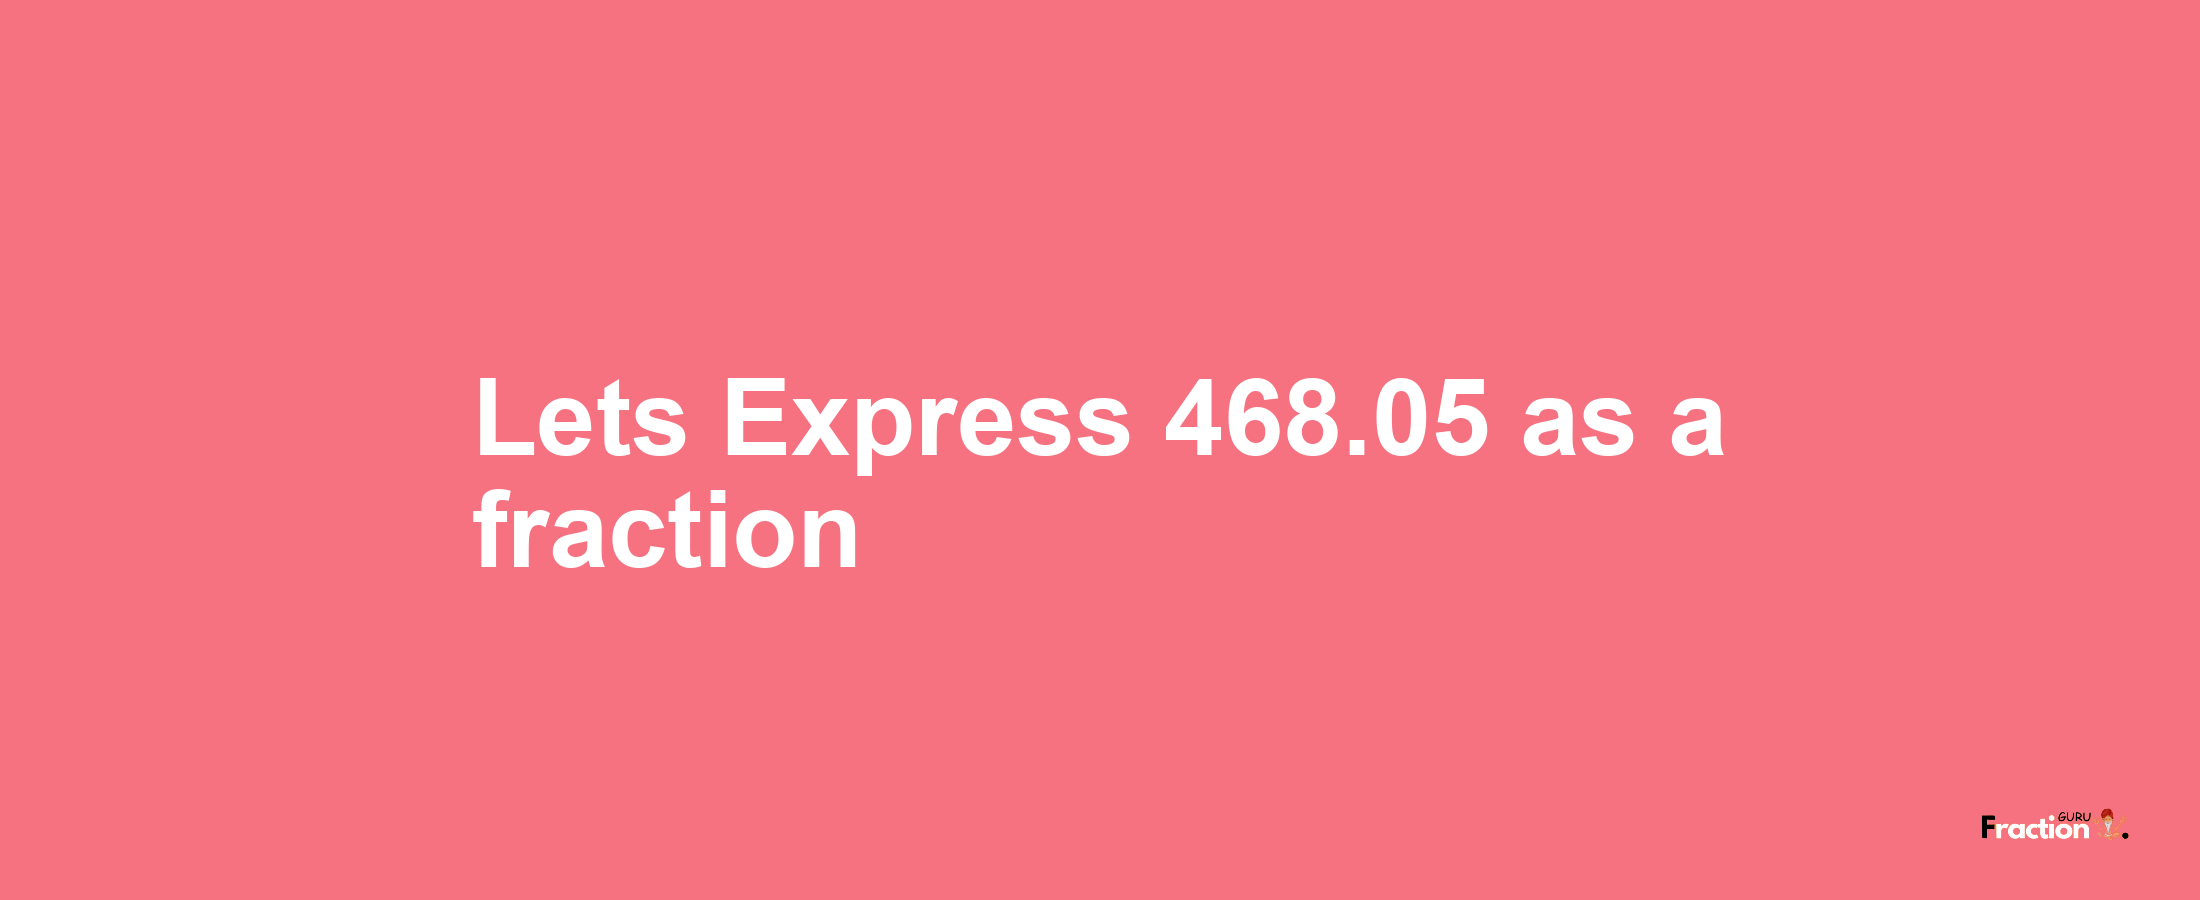 Lets Express 468.05 as afraction